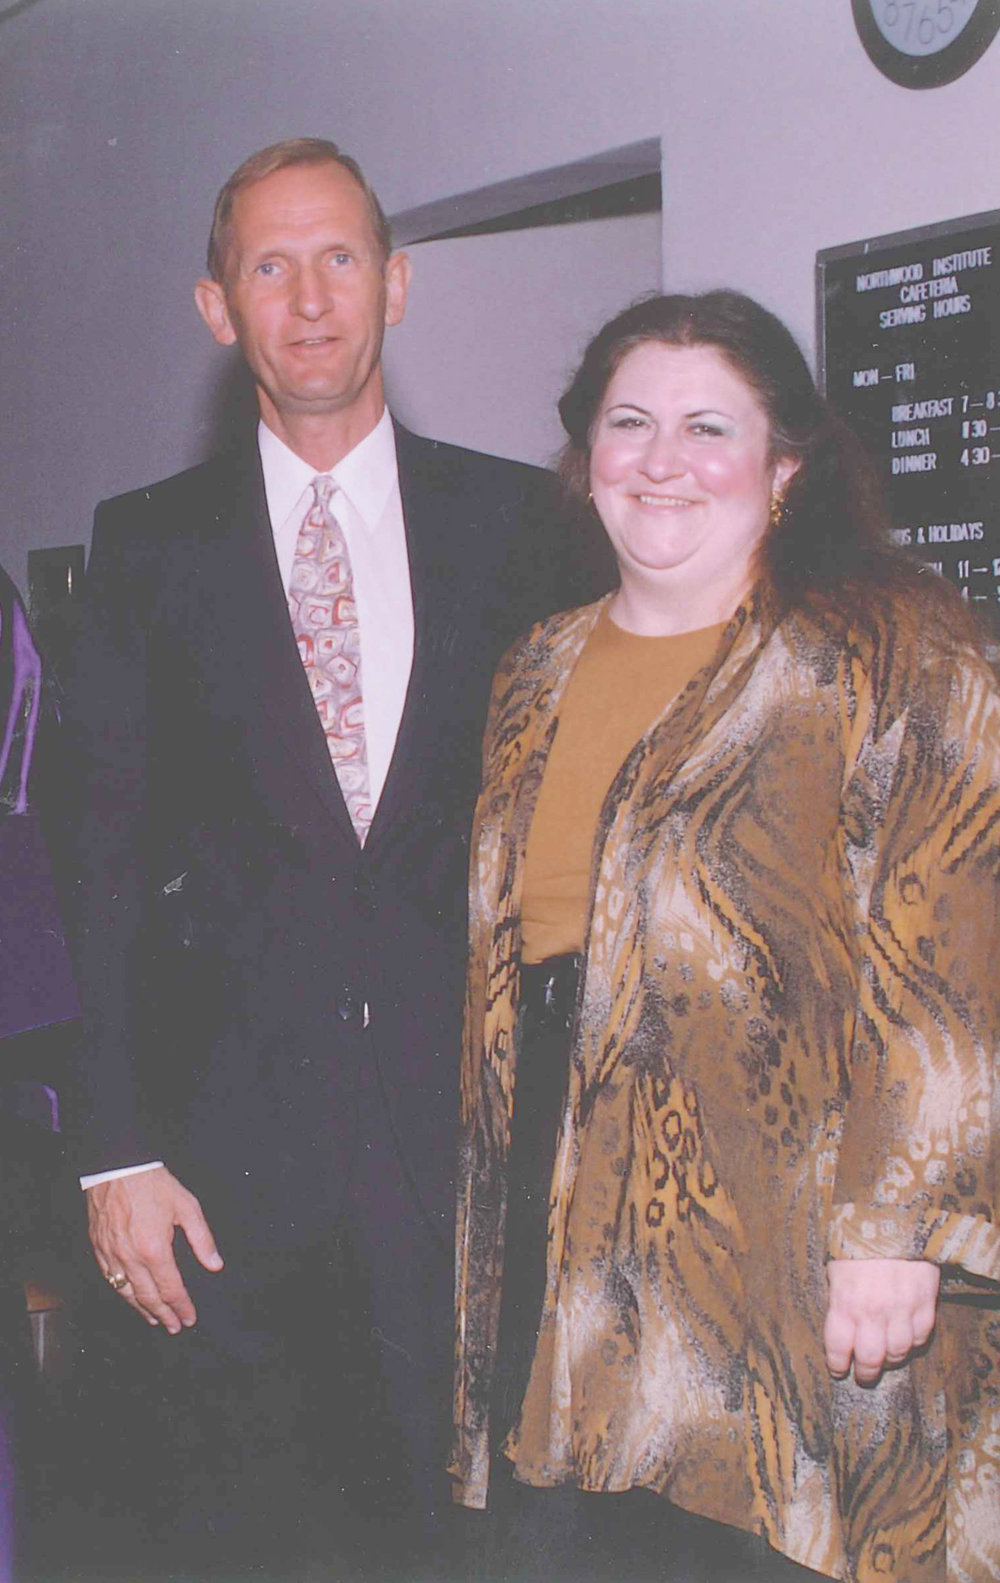 Professors Mike Tuttle and Cheryl Pridgeon enjoy a commencement ceremony in the early 1990's.